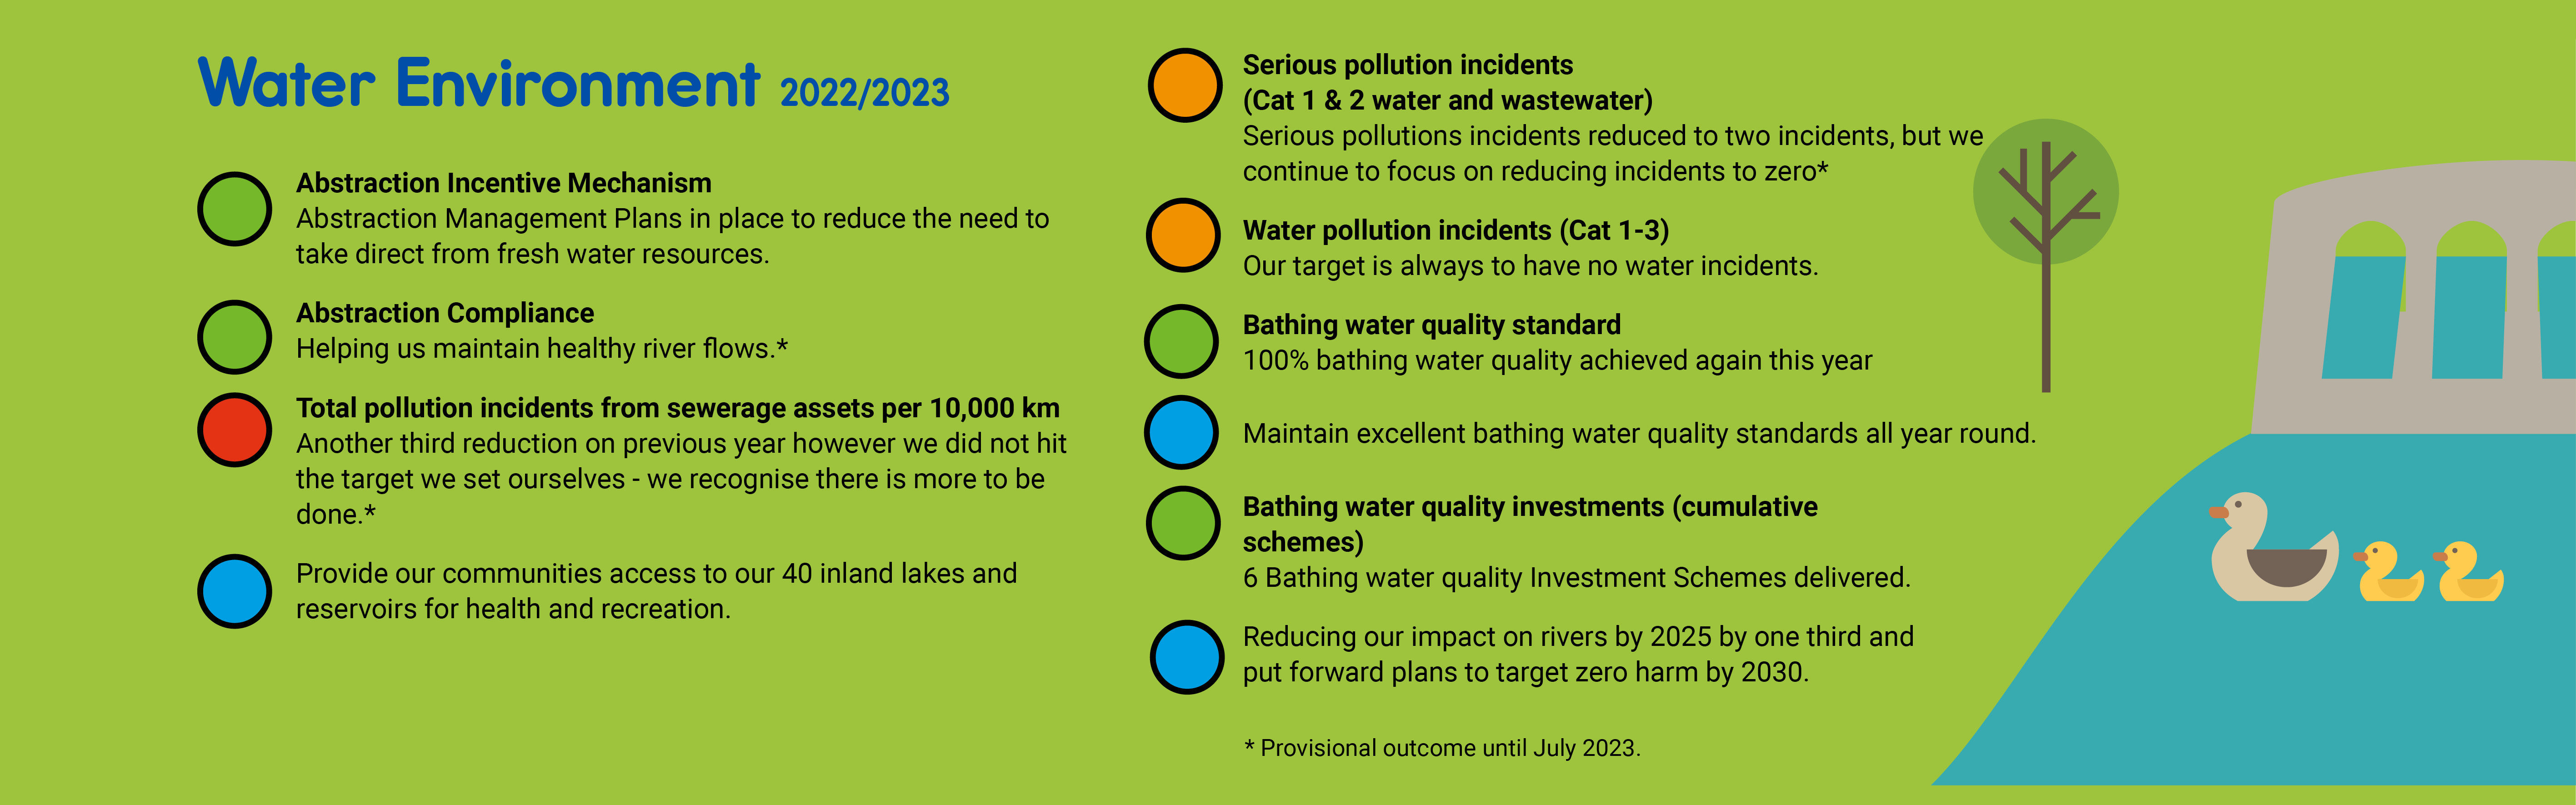 AB22-J10563_SWW_EP Infographic_v06_Section5_Water Environment.png